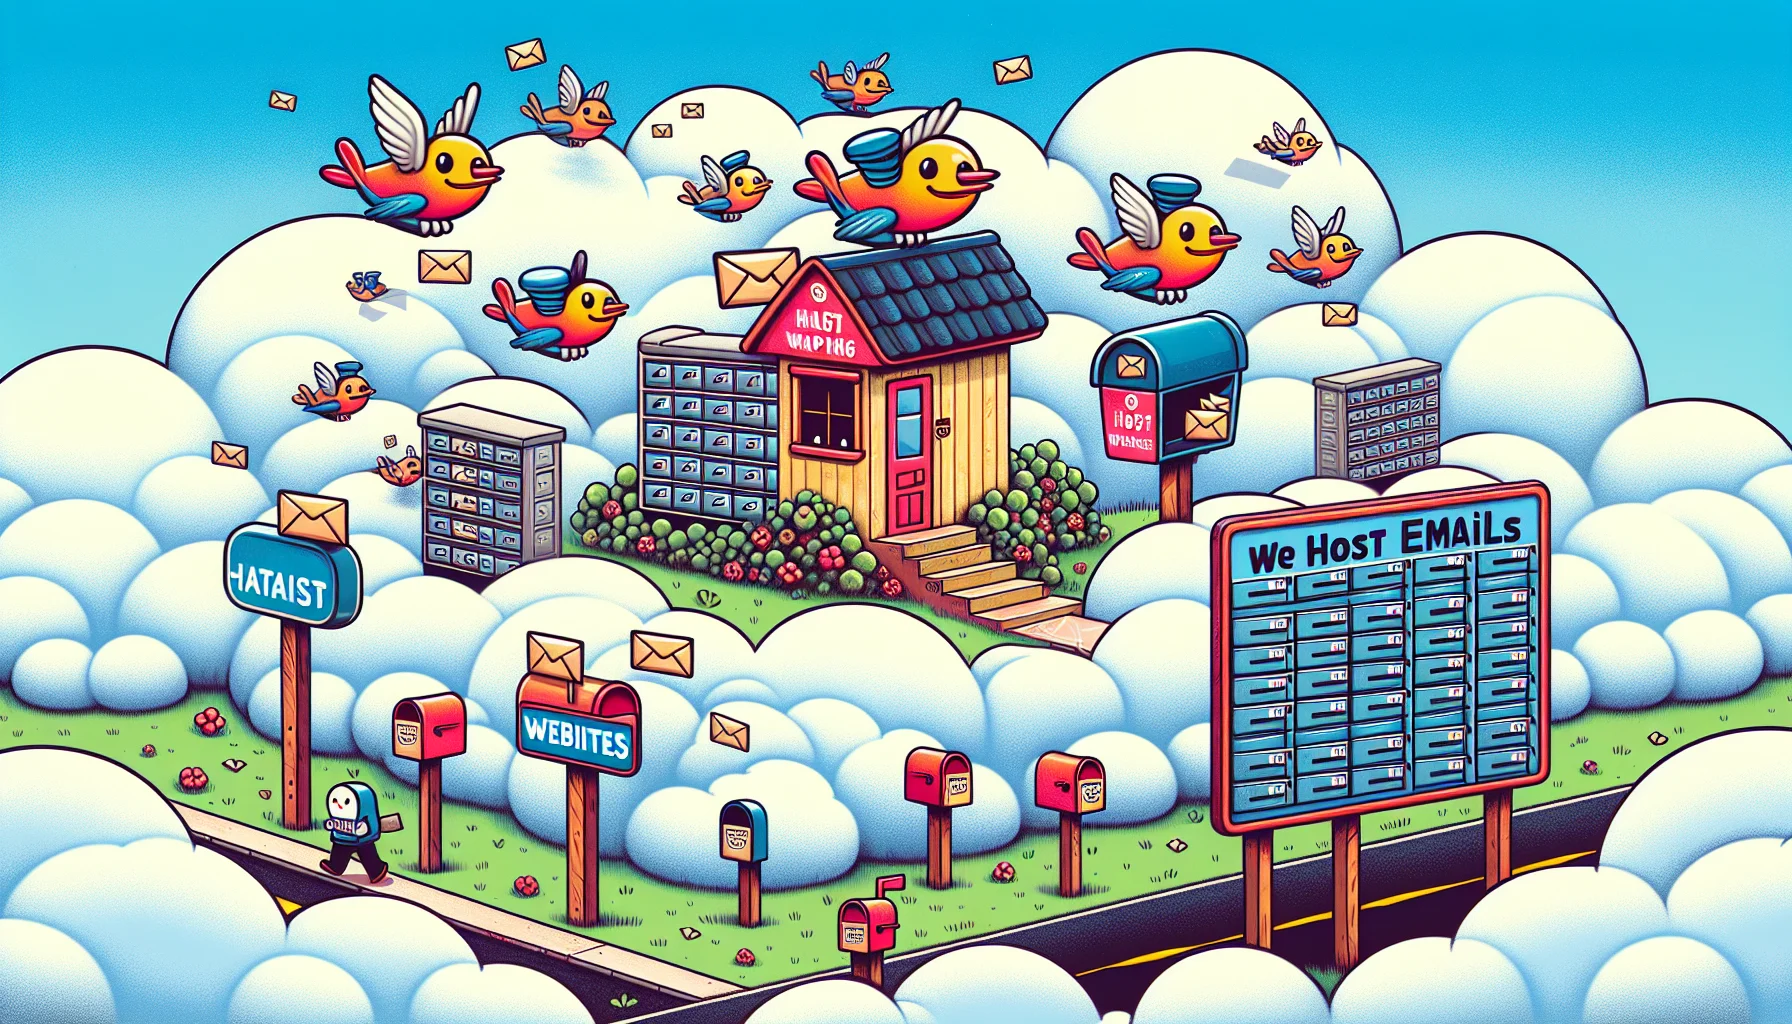 Create a vibrant, humorous illustration of a small, cartoonish post office in the clouds, bustling with mail carrier birds. The birds are carrying envelopes with '@' symbols, representing emails, and are dropping them off in mailboxes labeled with various domain names. There's also a billboard with the words 'We Host Emails' with a smiling mailbox backdrop. On the ground, an identical office exists with the billboard saying, 'We Host Websites', interestingly conveying the concept of email hosting versus web hosting.